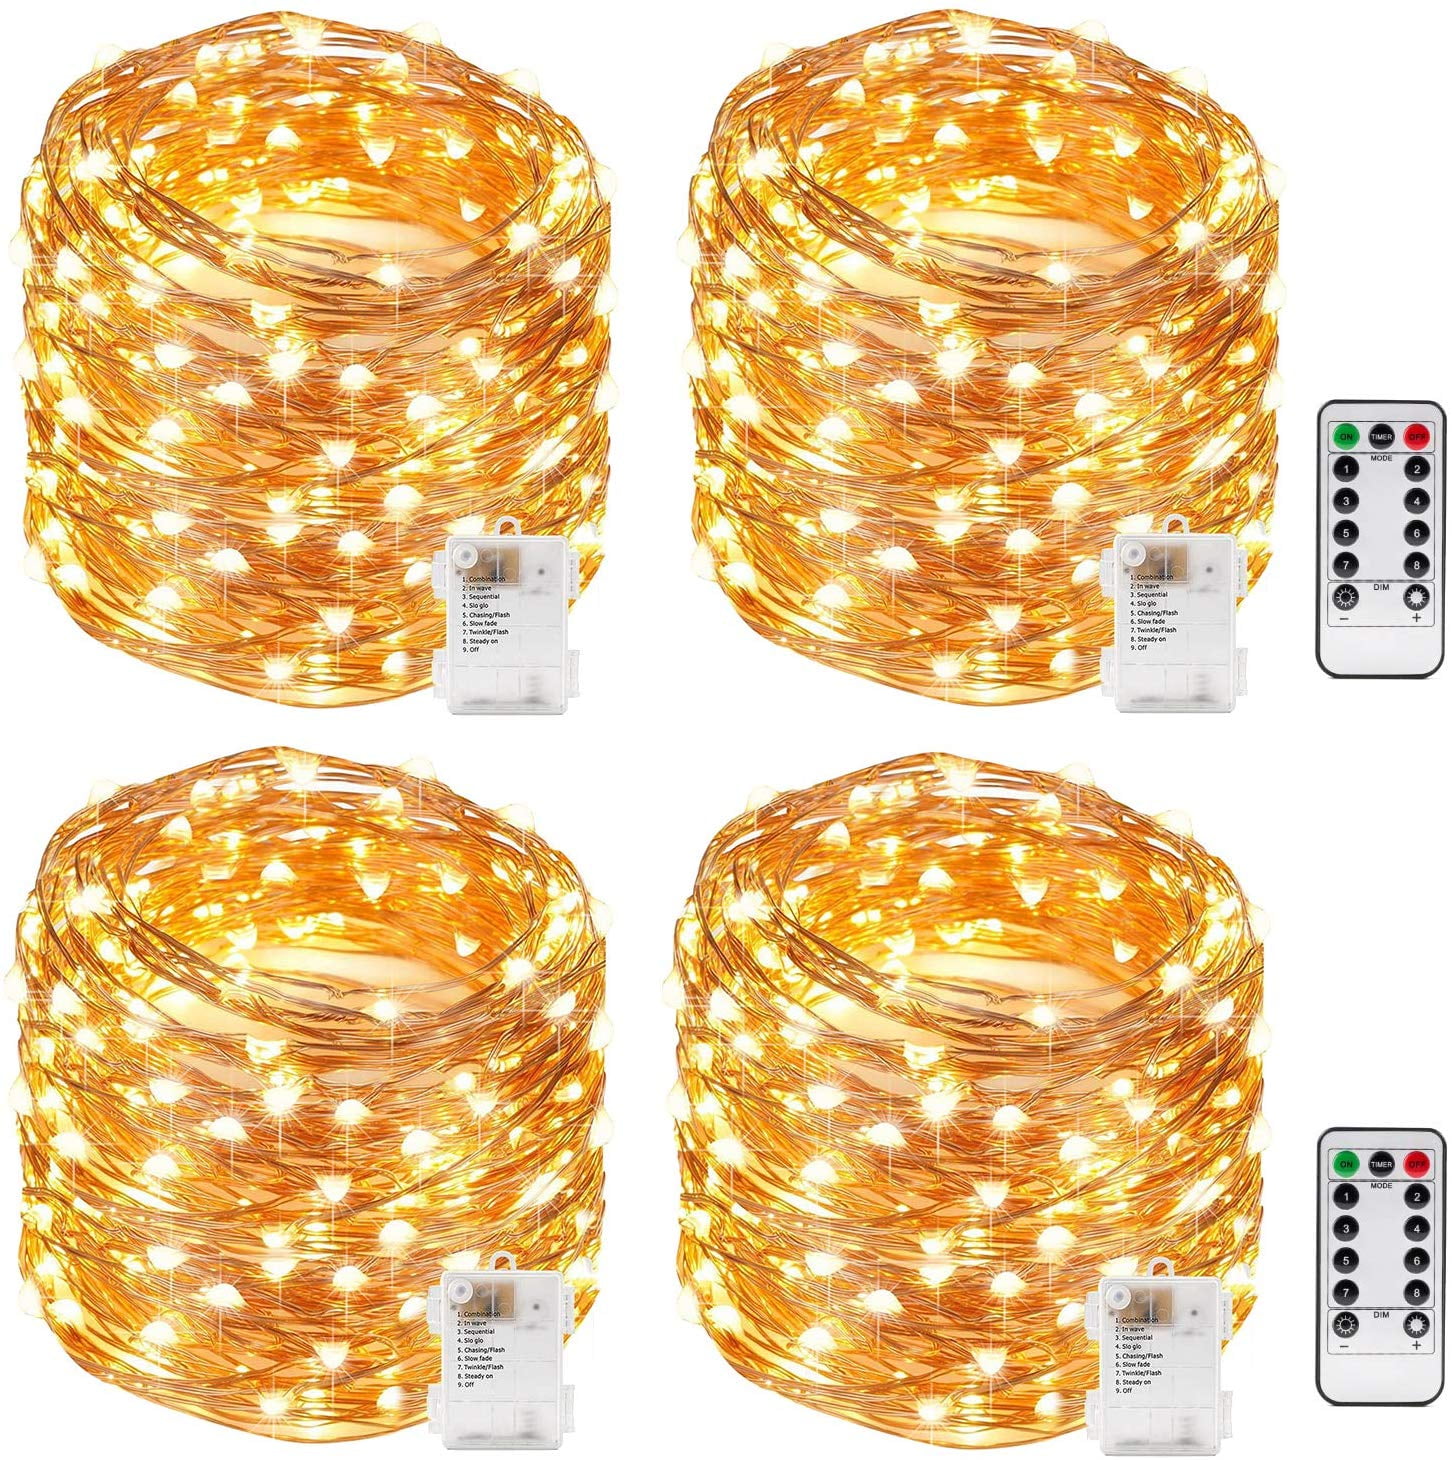 Kohree String Lights Christmas Lights Copper Wire Fairy Lights Remote Control Timer Battery Operated Waterproof 100 LED 33FT Firefly Lights for Bedroom Wedding Festival Décor 2 Packs